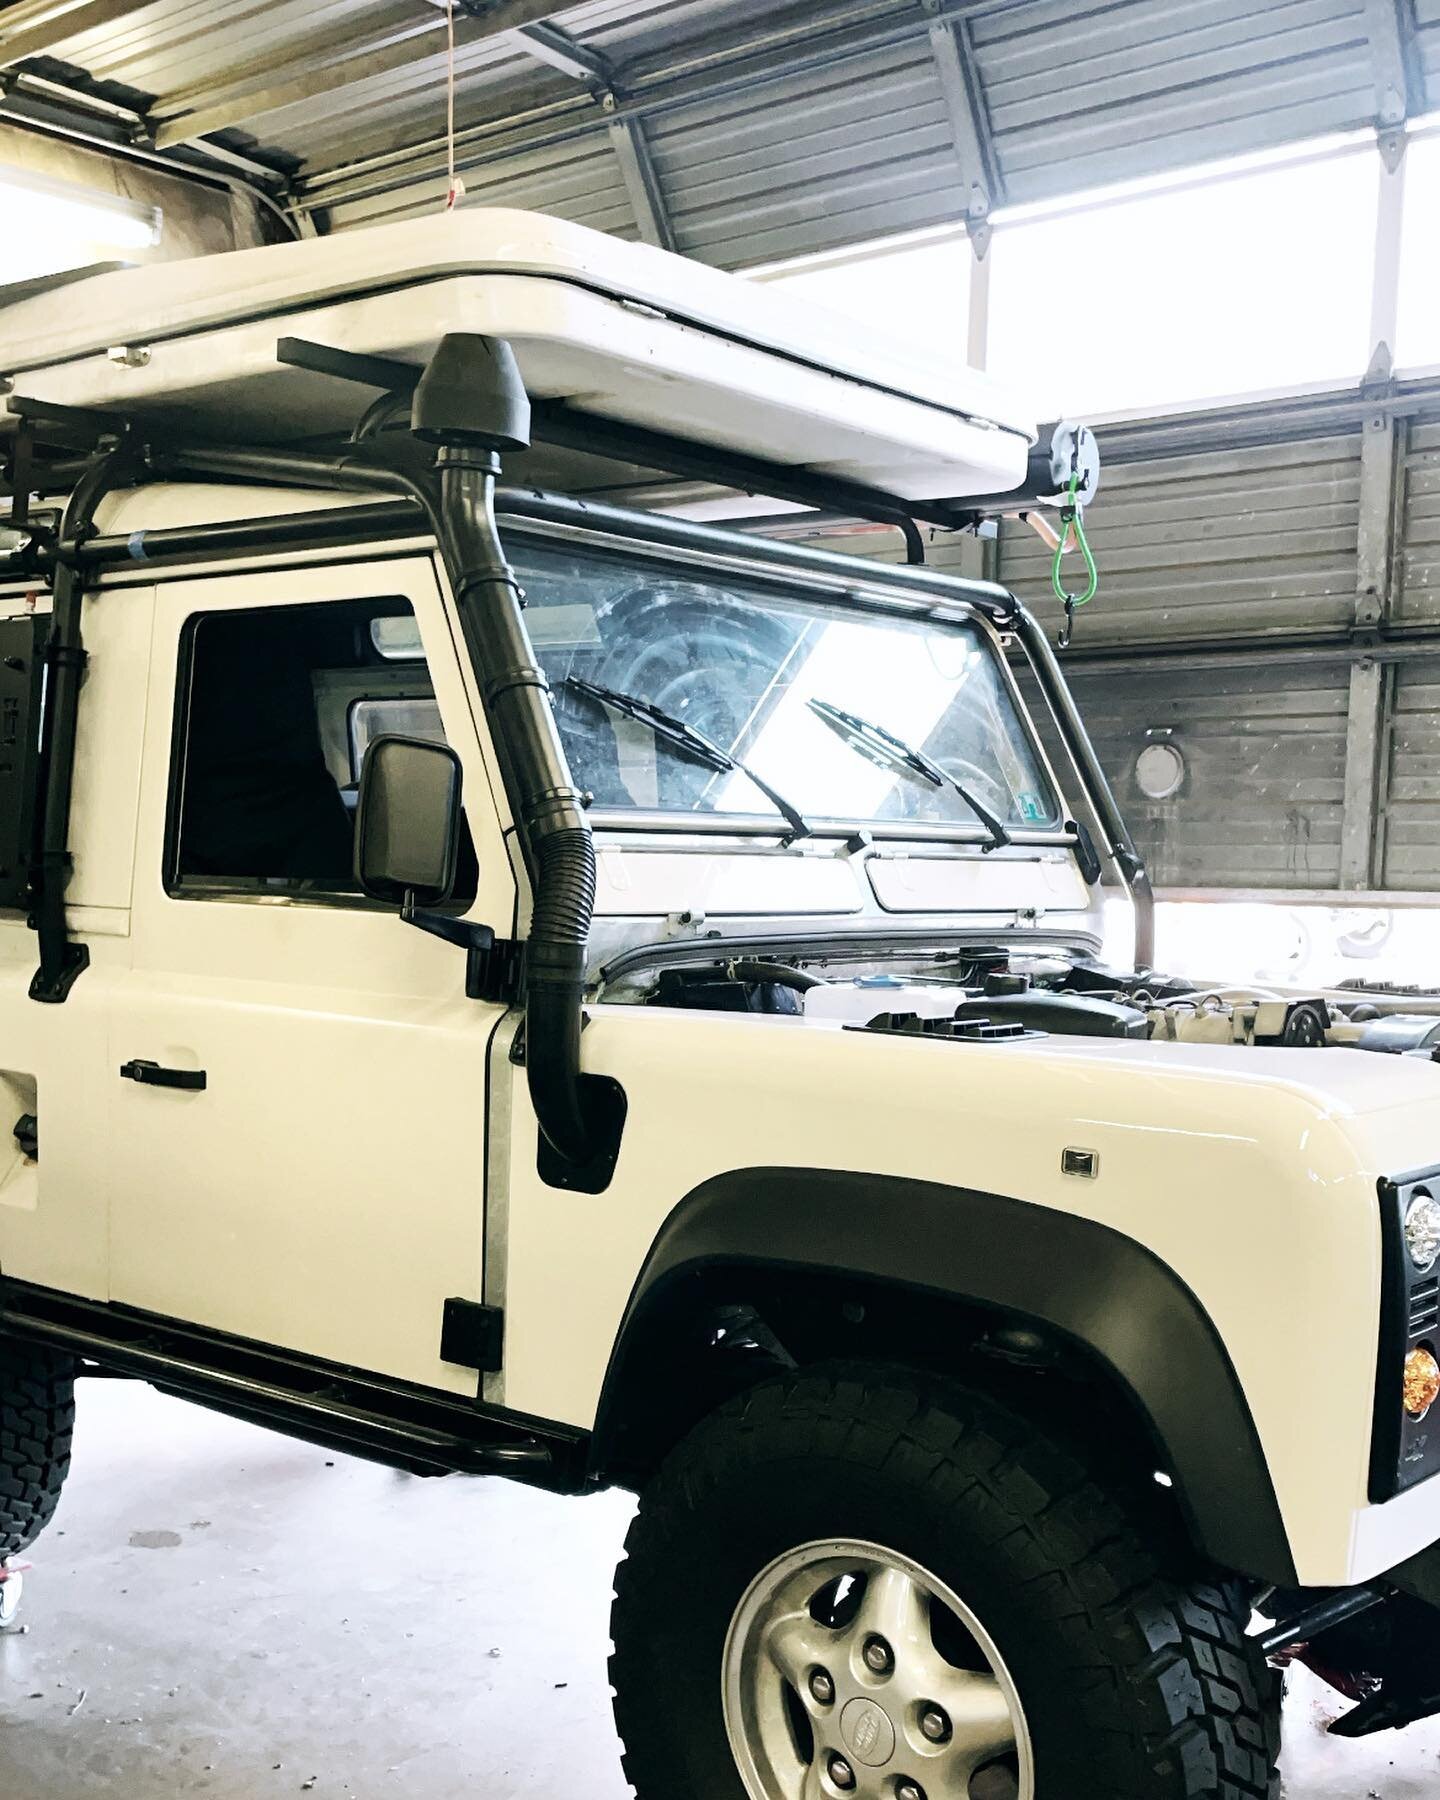 With the bulkhead swap completed, it was time to say goodbye to this #defender90 and deliver it back to The SFL coast. 

A small detour further south and this soft top 90 was scooped up and brought back to Camel City. 

Which setup do you prefer?

#l